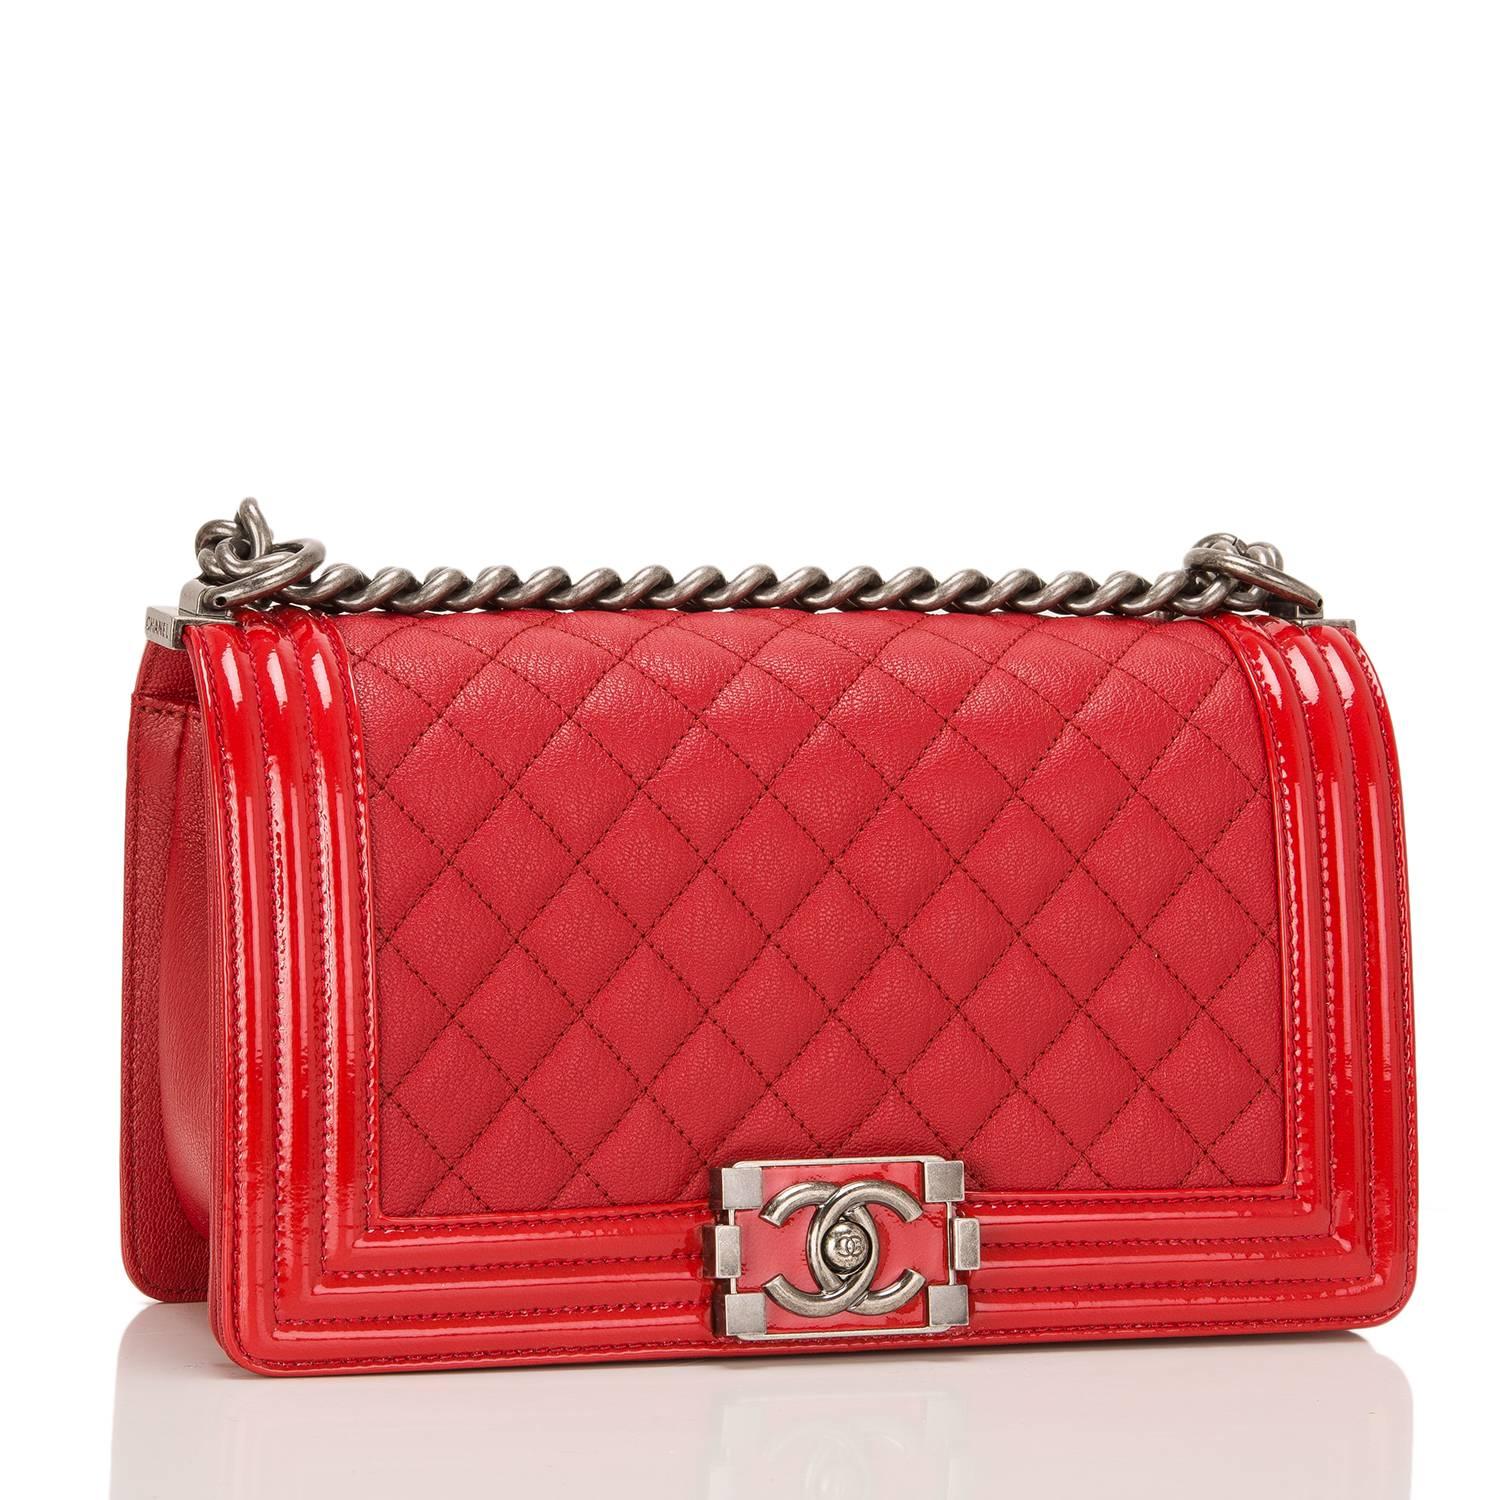 Chanel Medium Boy bag made of red goatskin (chevre) leather accented with patent leather trim and aged ruthenium hardware.

The bag features a full front flap with a limited edition Le Boy push lock CC closure in a glossy red lacquer and ruthenium